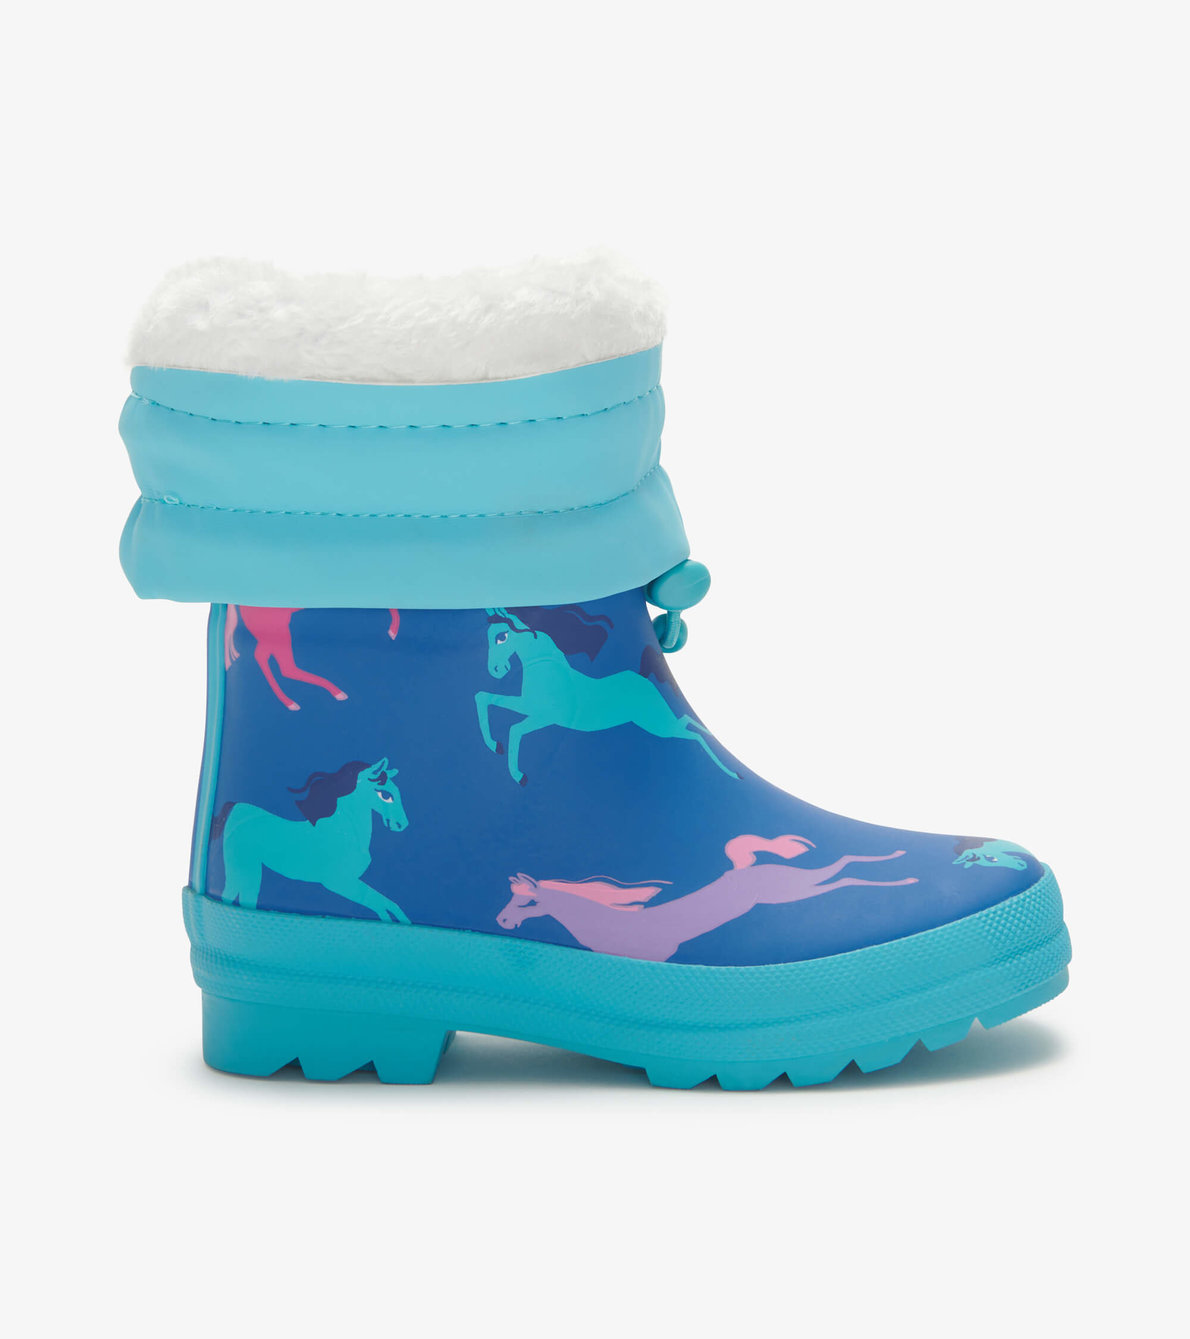 View larger image of Prancing Horses Sherpa Lined Kids Wellies